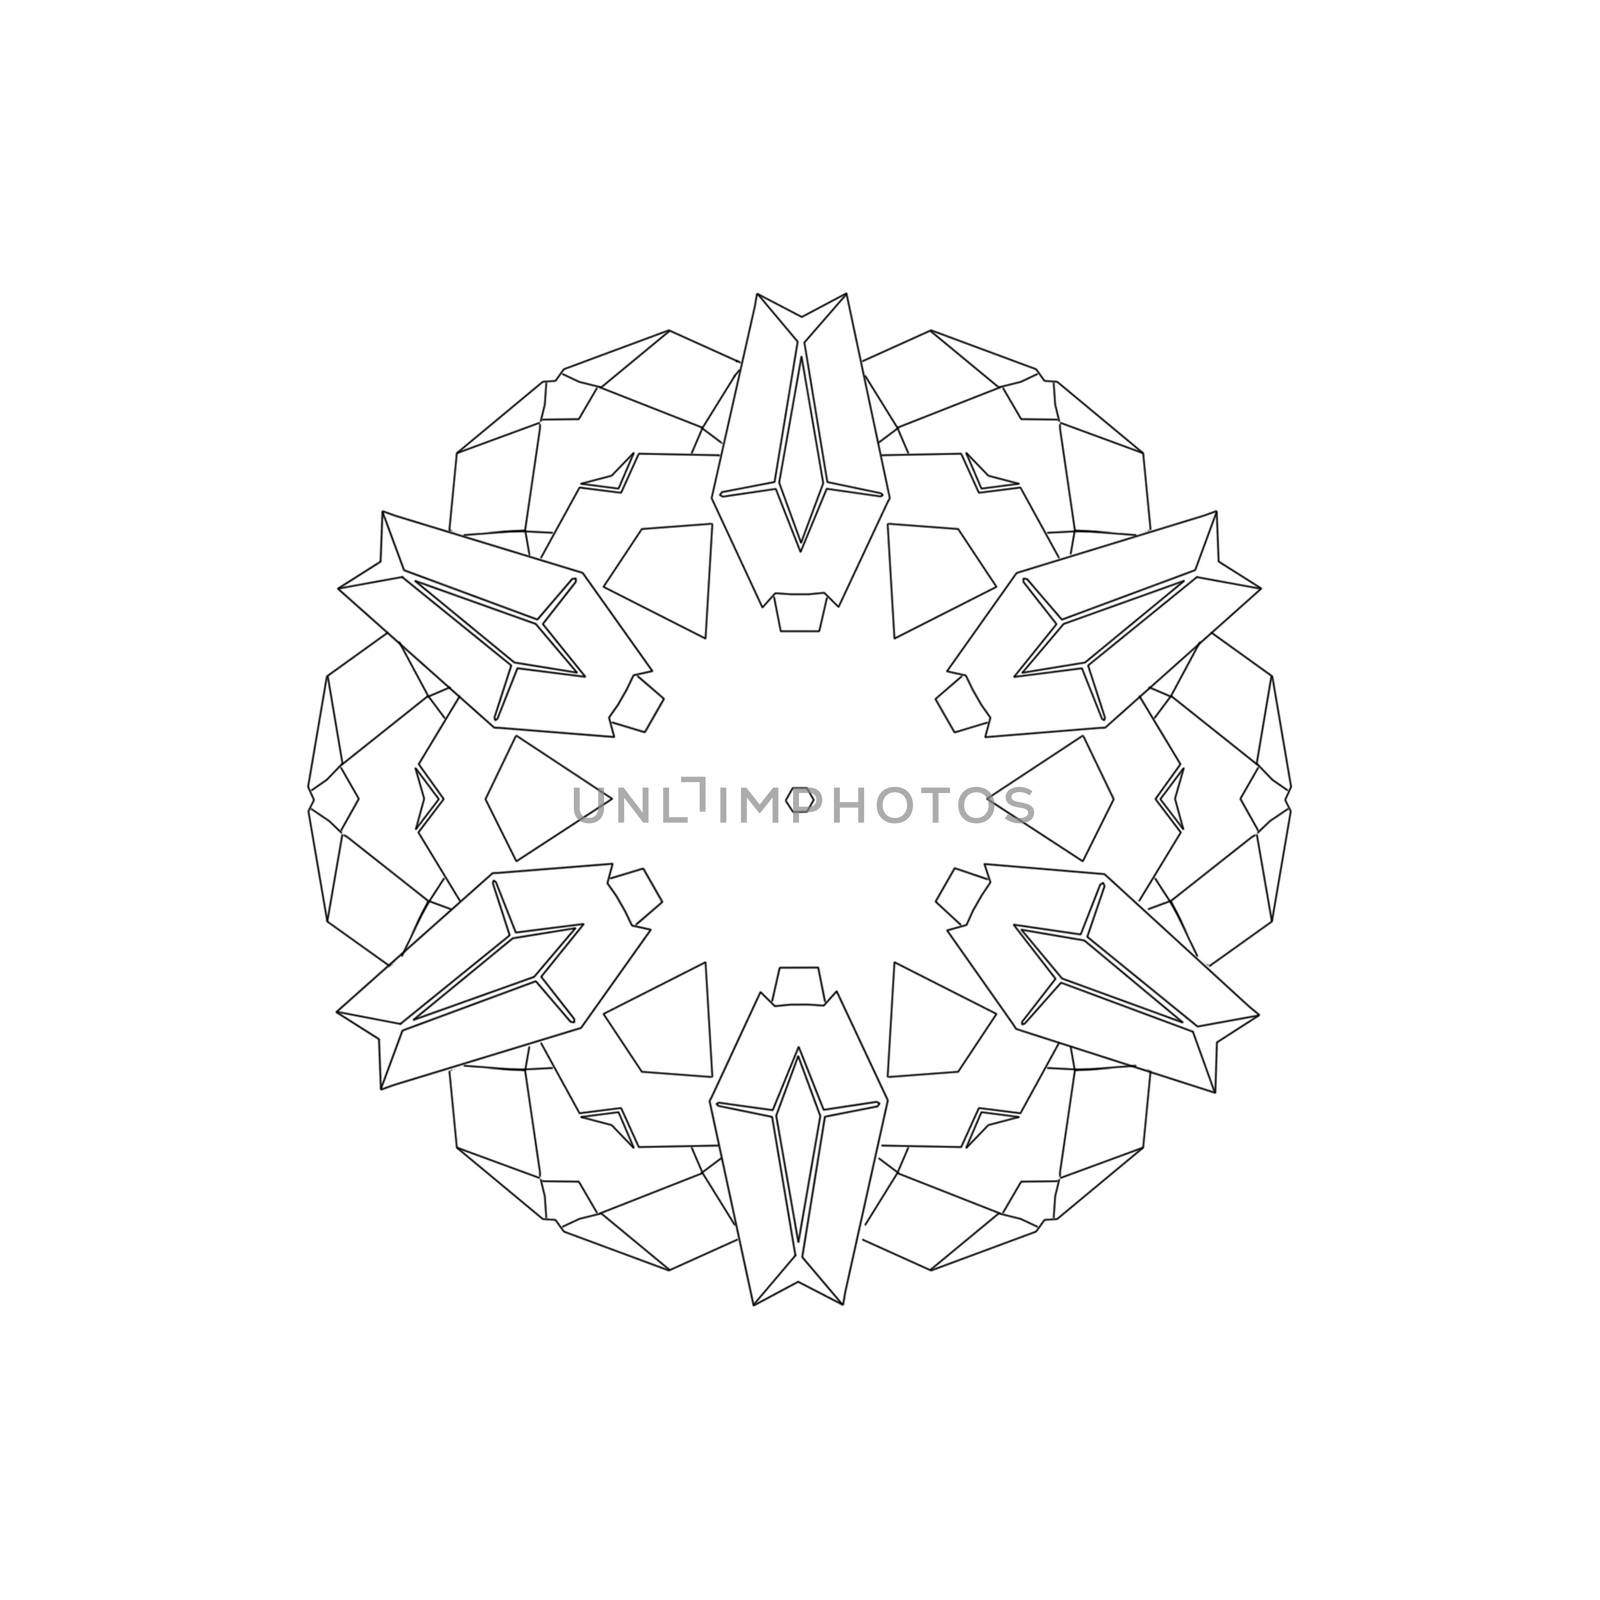 Illustration: Coloring Book Series: Diamond Flower. Soft thin line. Print it and bring it to Life with Color! Fantastic Outline / Sketch / Line Art Design.